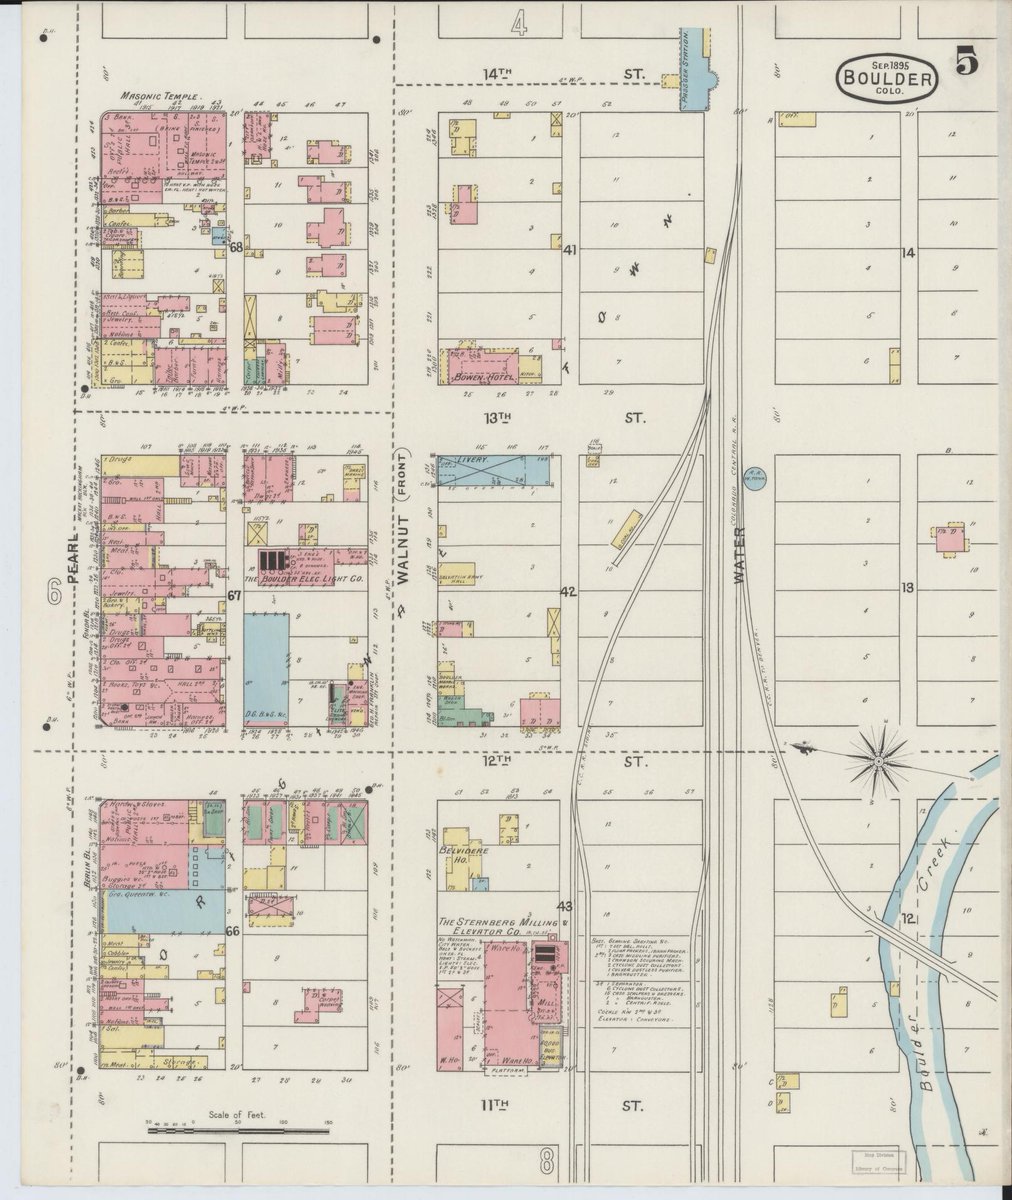 Calling all genealogists, archaeologists, environmental researchers, urban historians, & general mapheads: join G&M staff next Tuesday at 3pm EDT for an updated introduction to Sanborn fire insurance maps! Bring your questions for the Q&A. Register here: loc.zoomgov.com/webinar/regist…